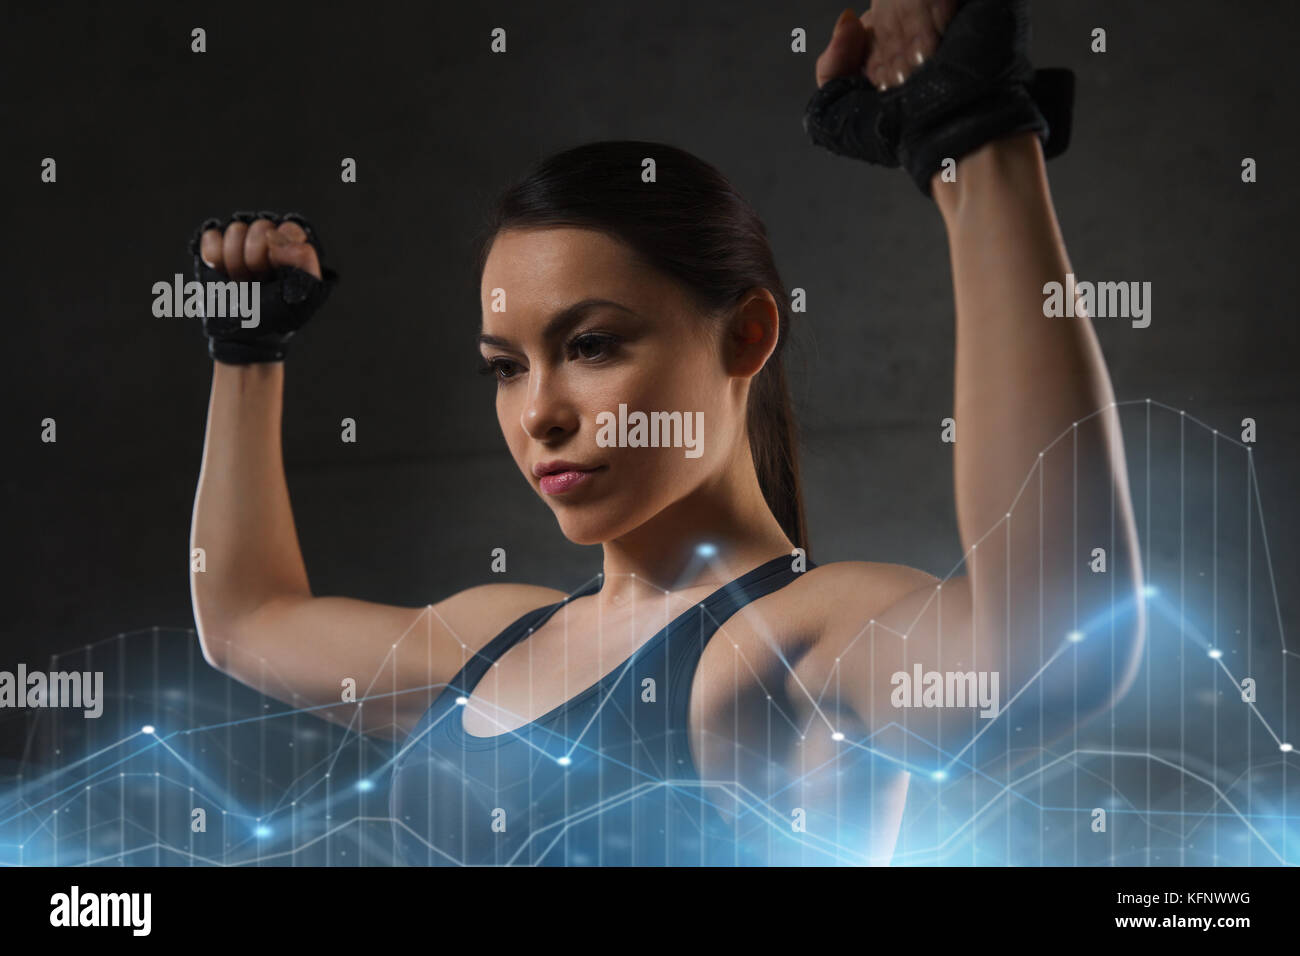 young woman flexing muscles in gym Stock Photo